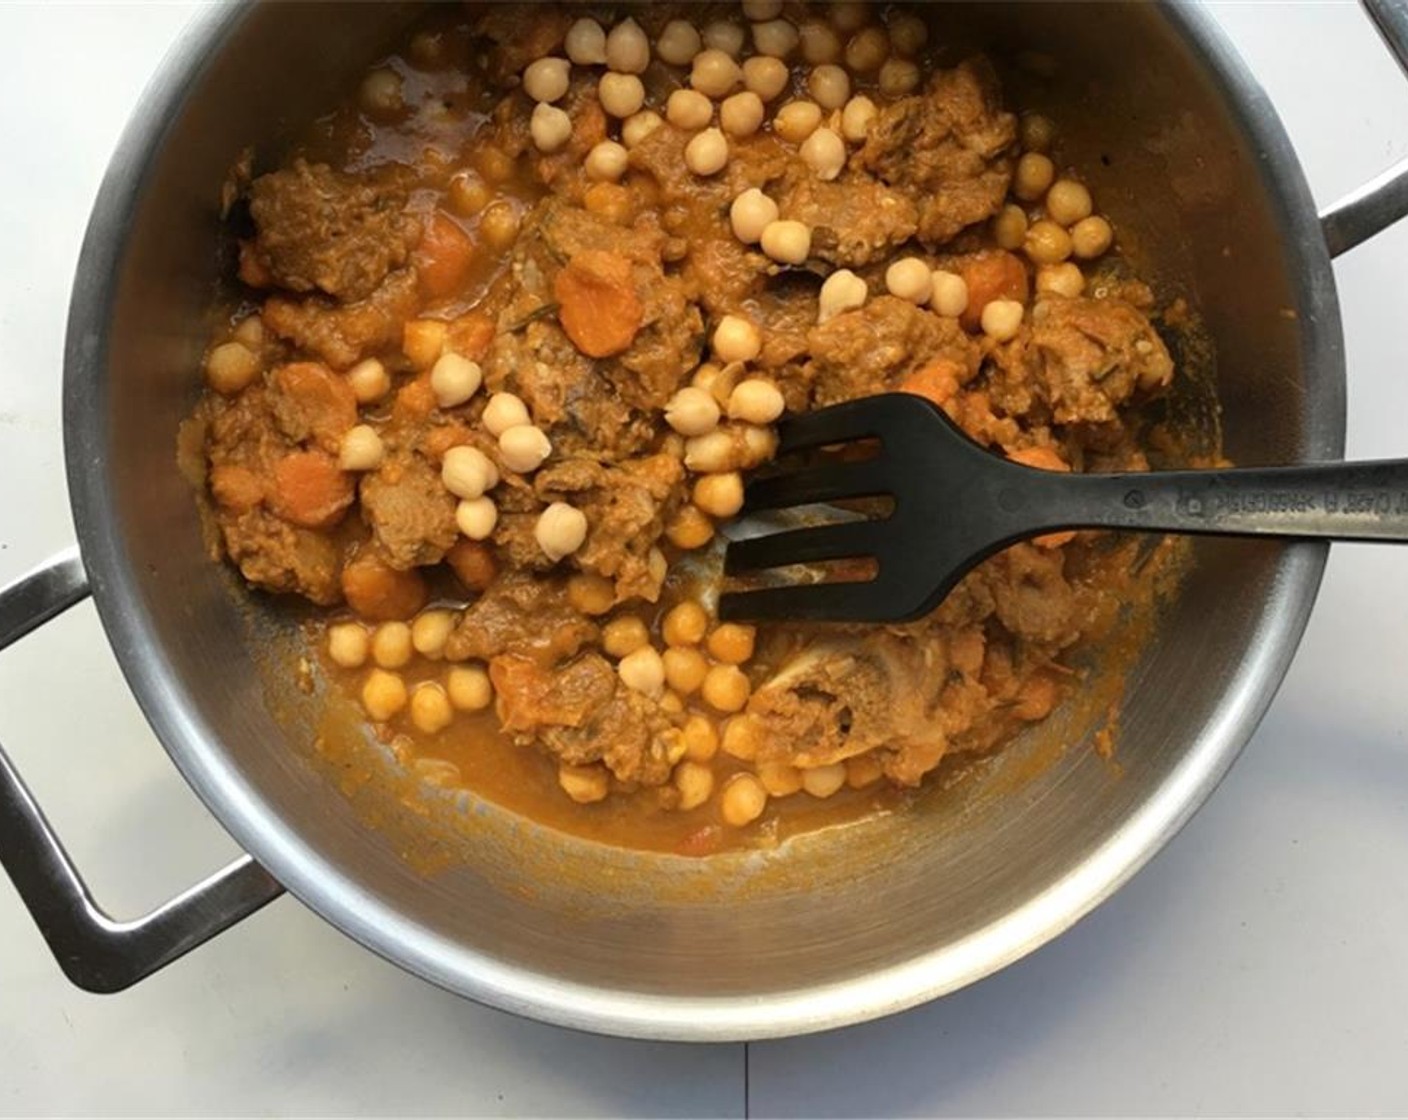 step 5 Stir well again. Bring the stew to a good boil and then turn the heat low. Put a lid on the casserole and let the lamb stew for 90 minutes. Then let the stew cool down fully.Then reheat the stew again and add the drained Canned Chickpeas (2 cups).